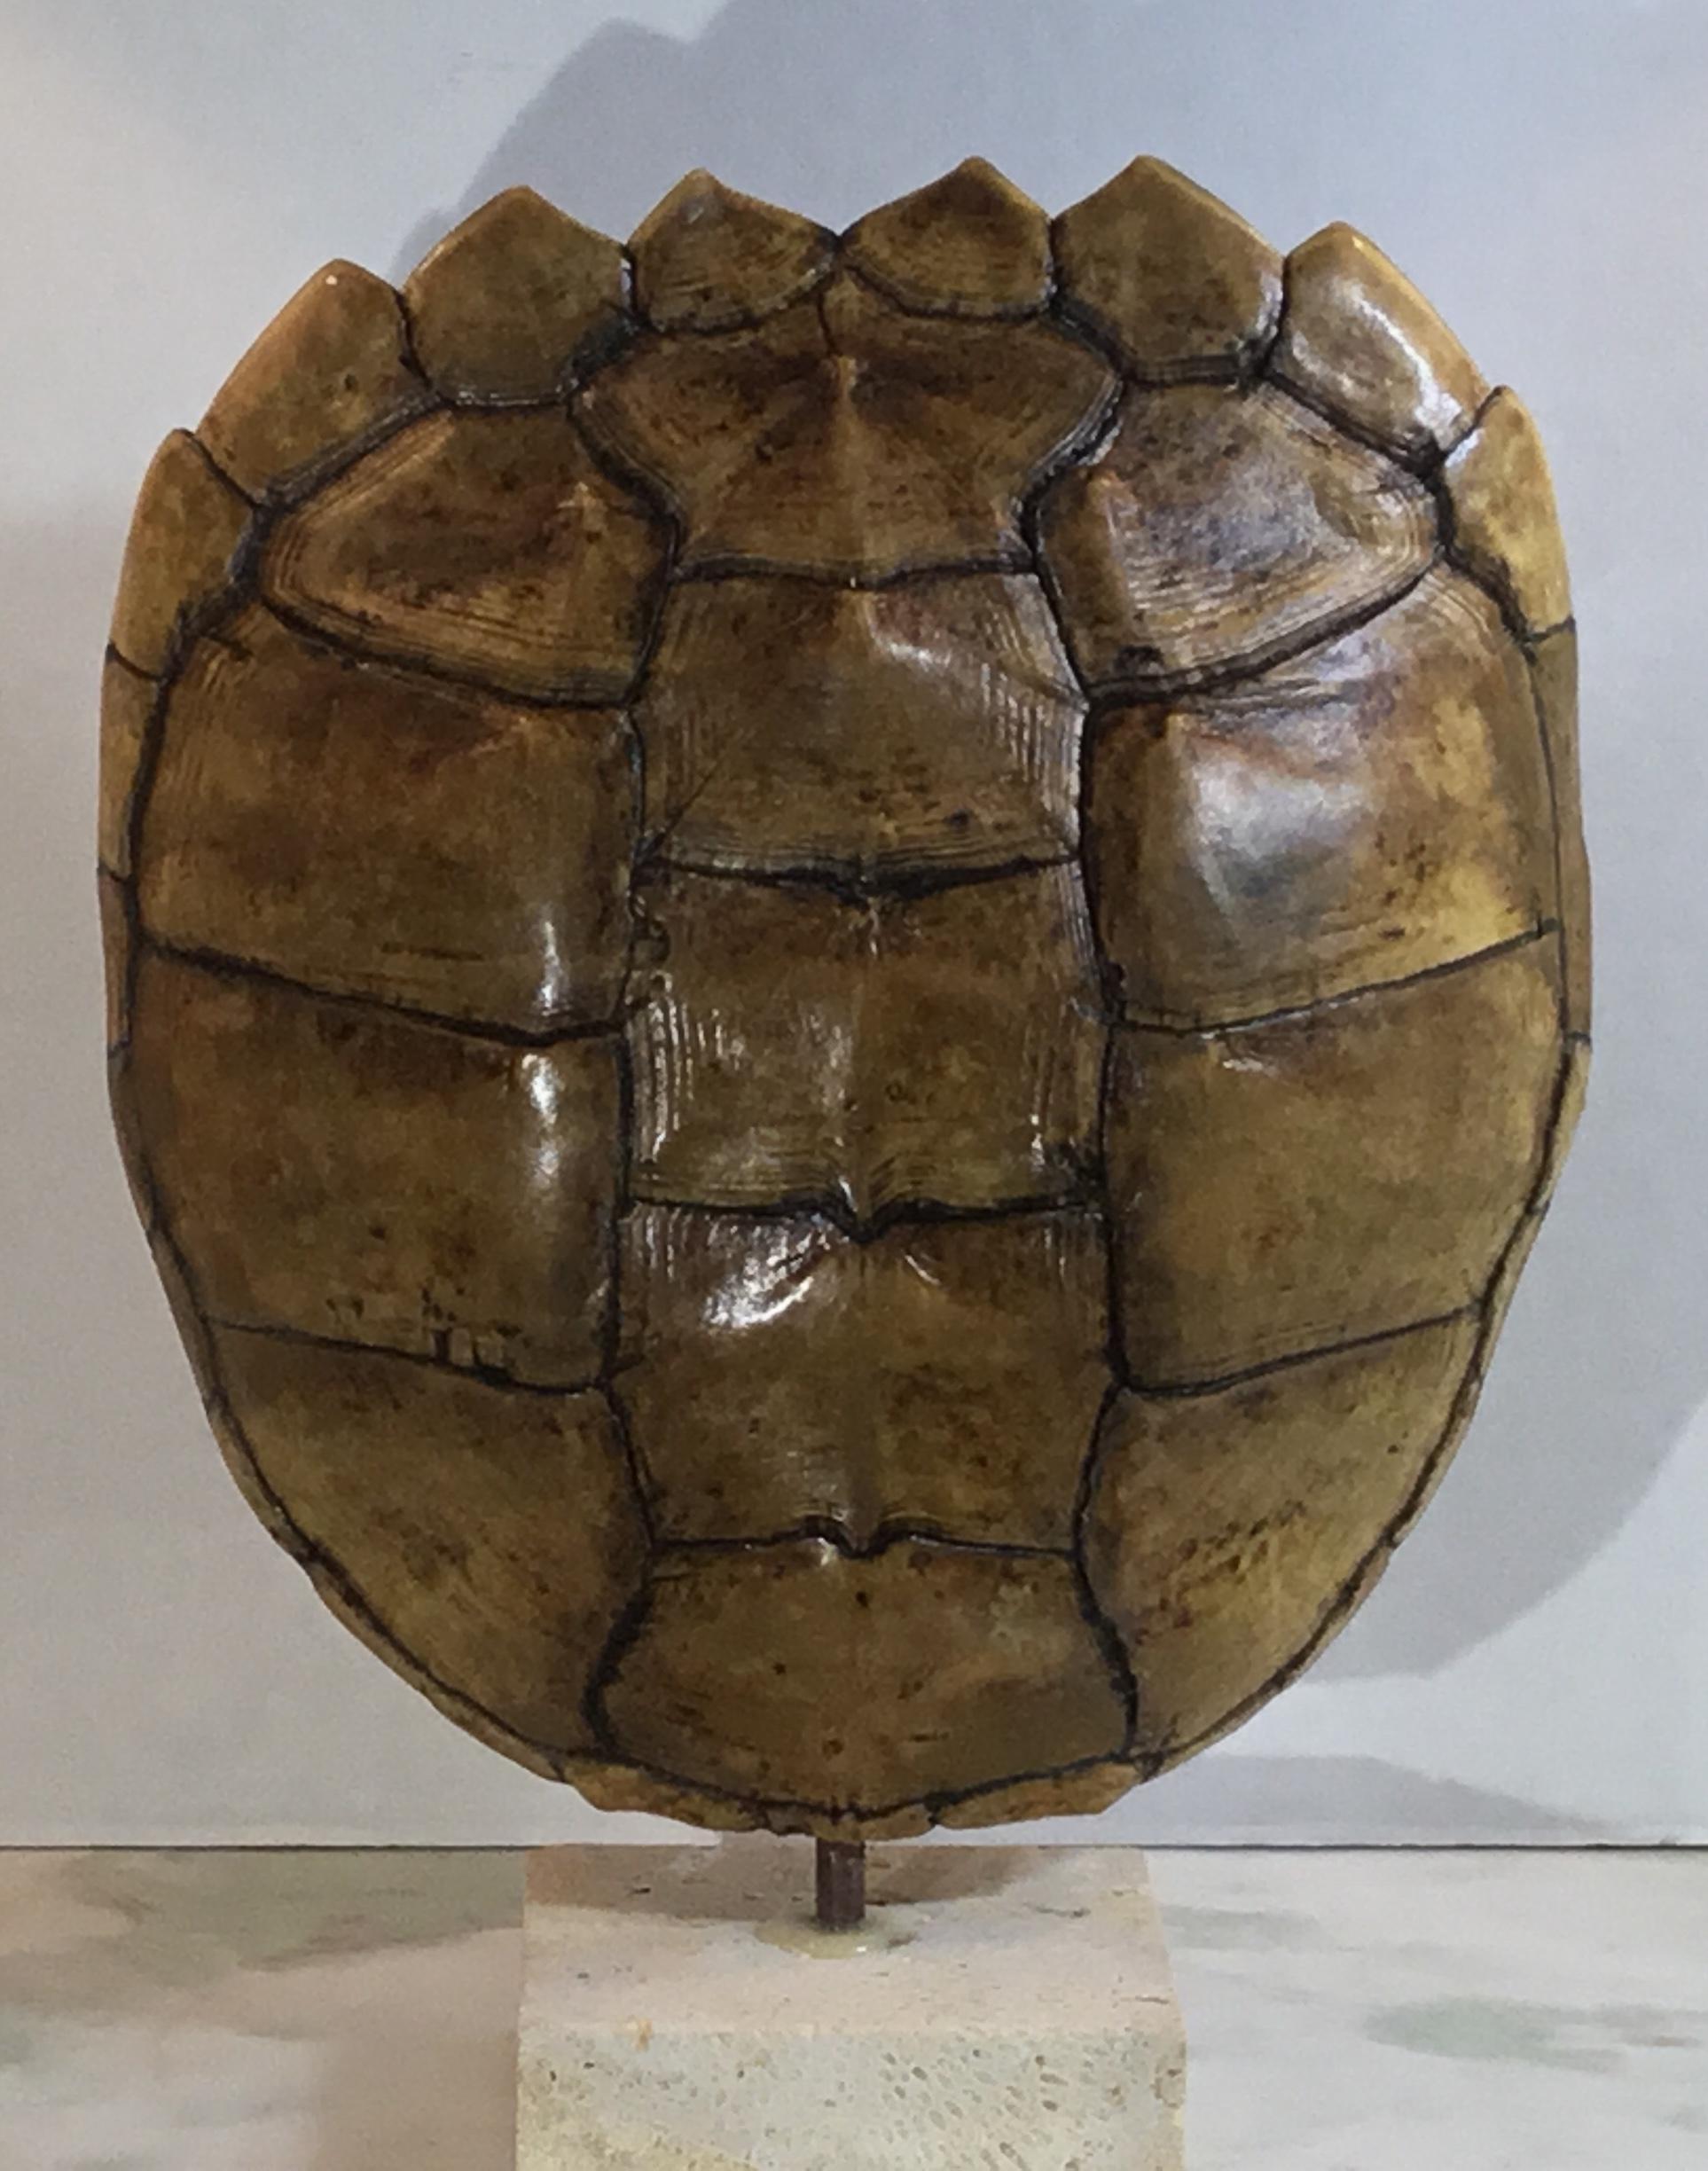 Genuine American Frash Water Snapping Turtle Shell 7